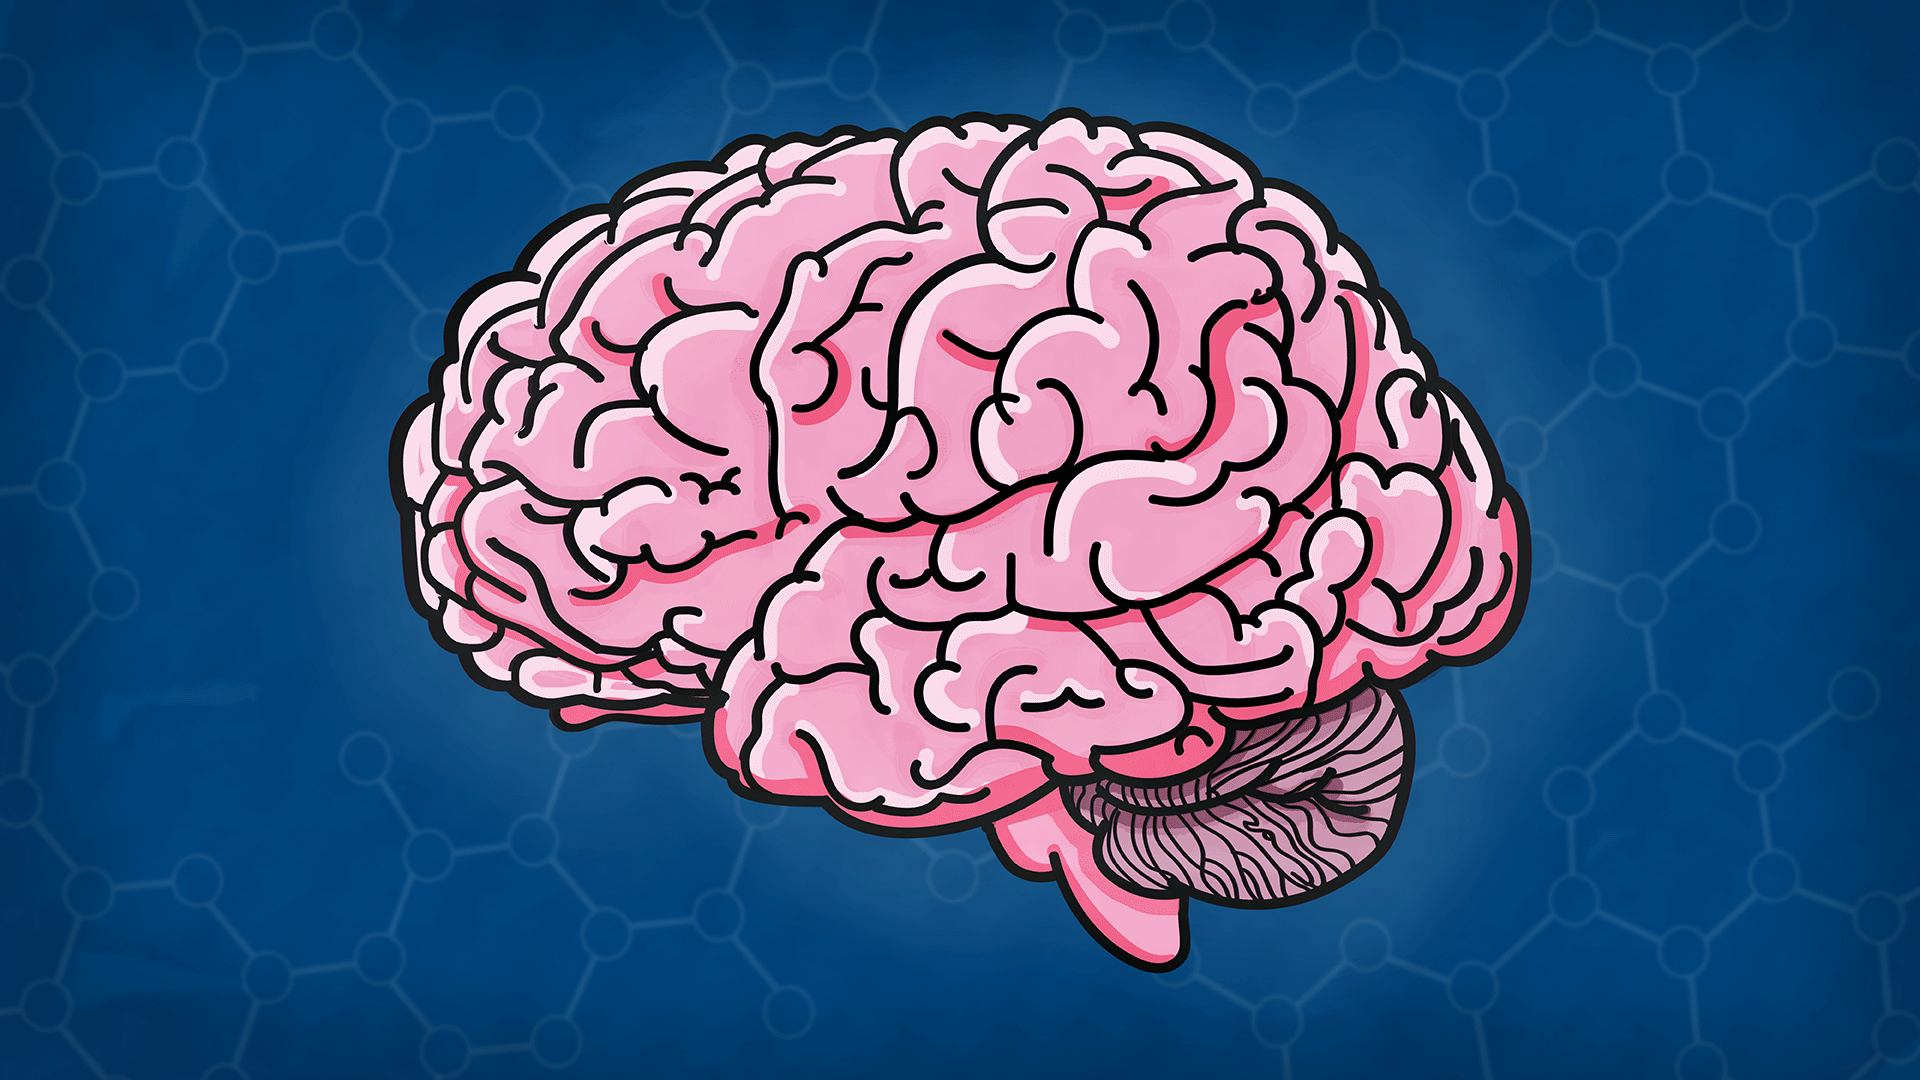 illustration of a human brain in profile